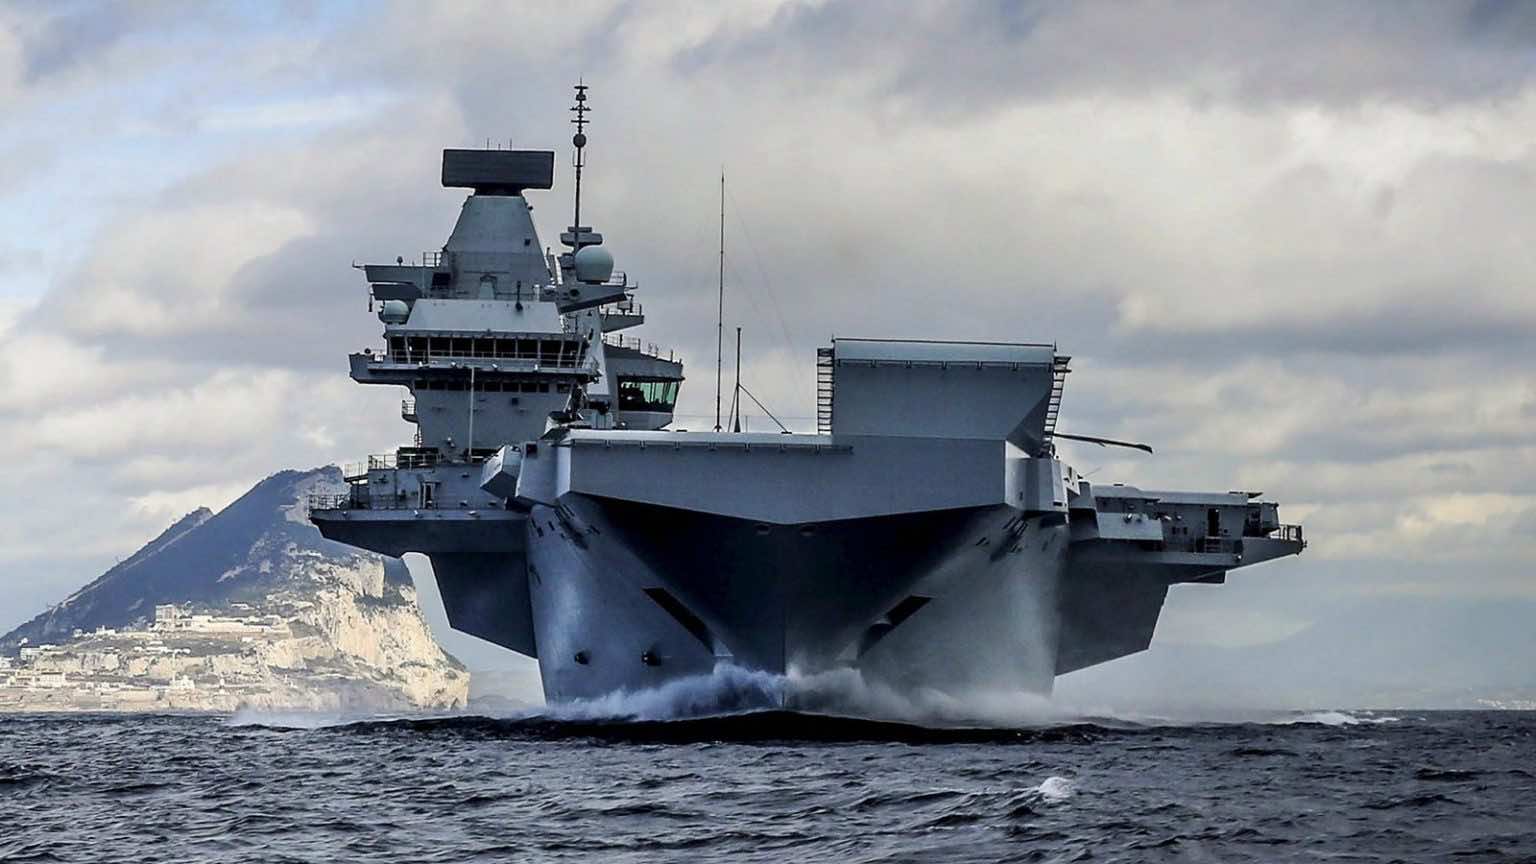 The Flagship Aircraft Carrier Of The Royal Navy: HMS Queen Elizabeth